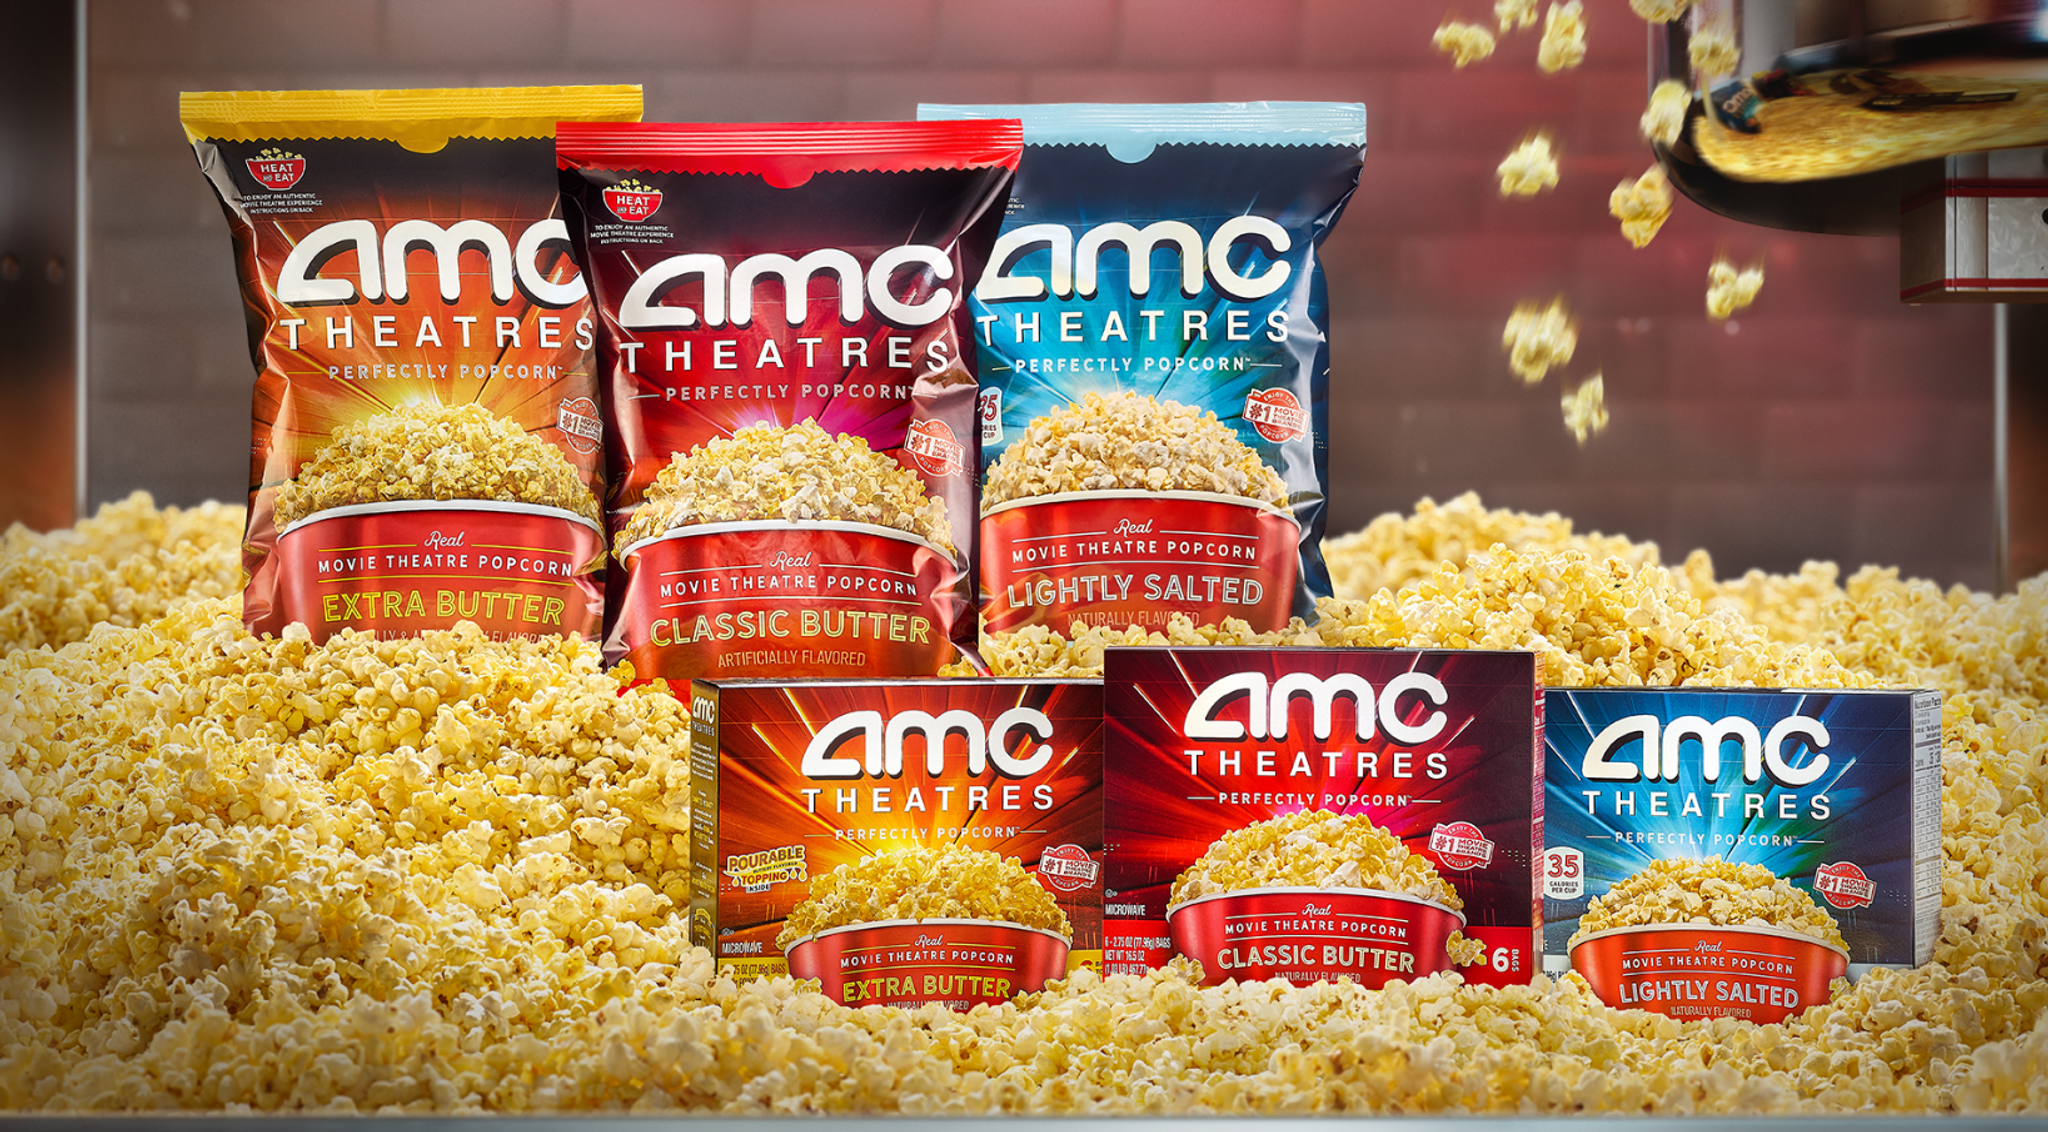 AMC offers theater-style popcorn for at-home audiences